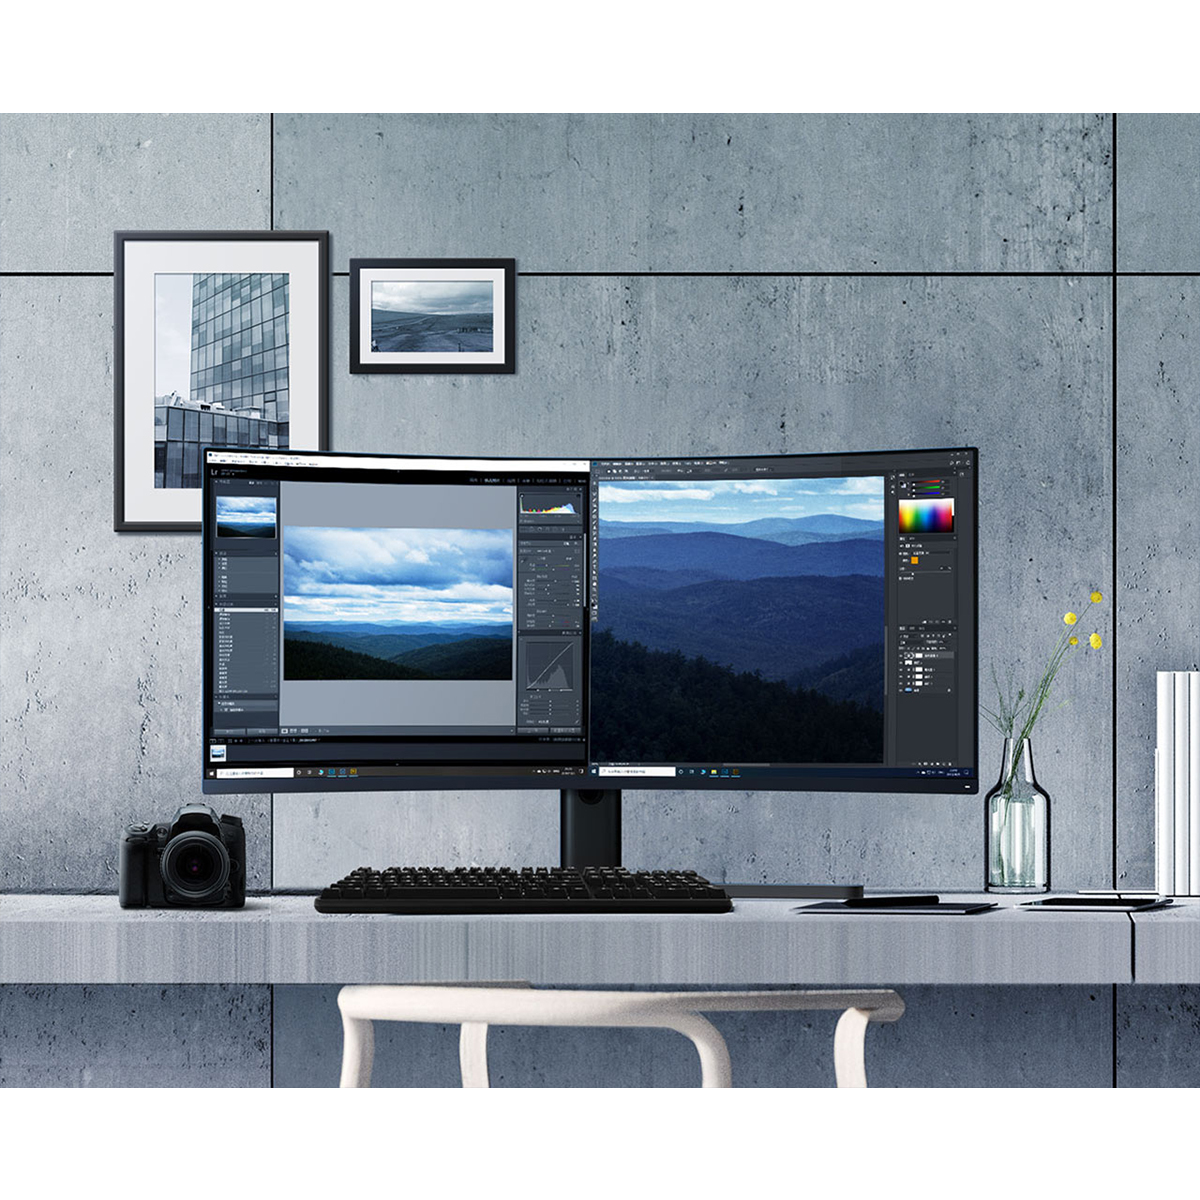 Find XIAOMI Curved Gaming Monitor 144Hz 3440 1440 Resolution 34 Inch 21 9 Bring Fish Screen Sync Technology Display Monitor With CN/EU Plug for Sale on Gipsybee.com with cryptocurrencies